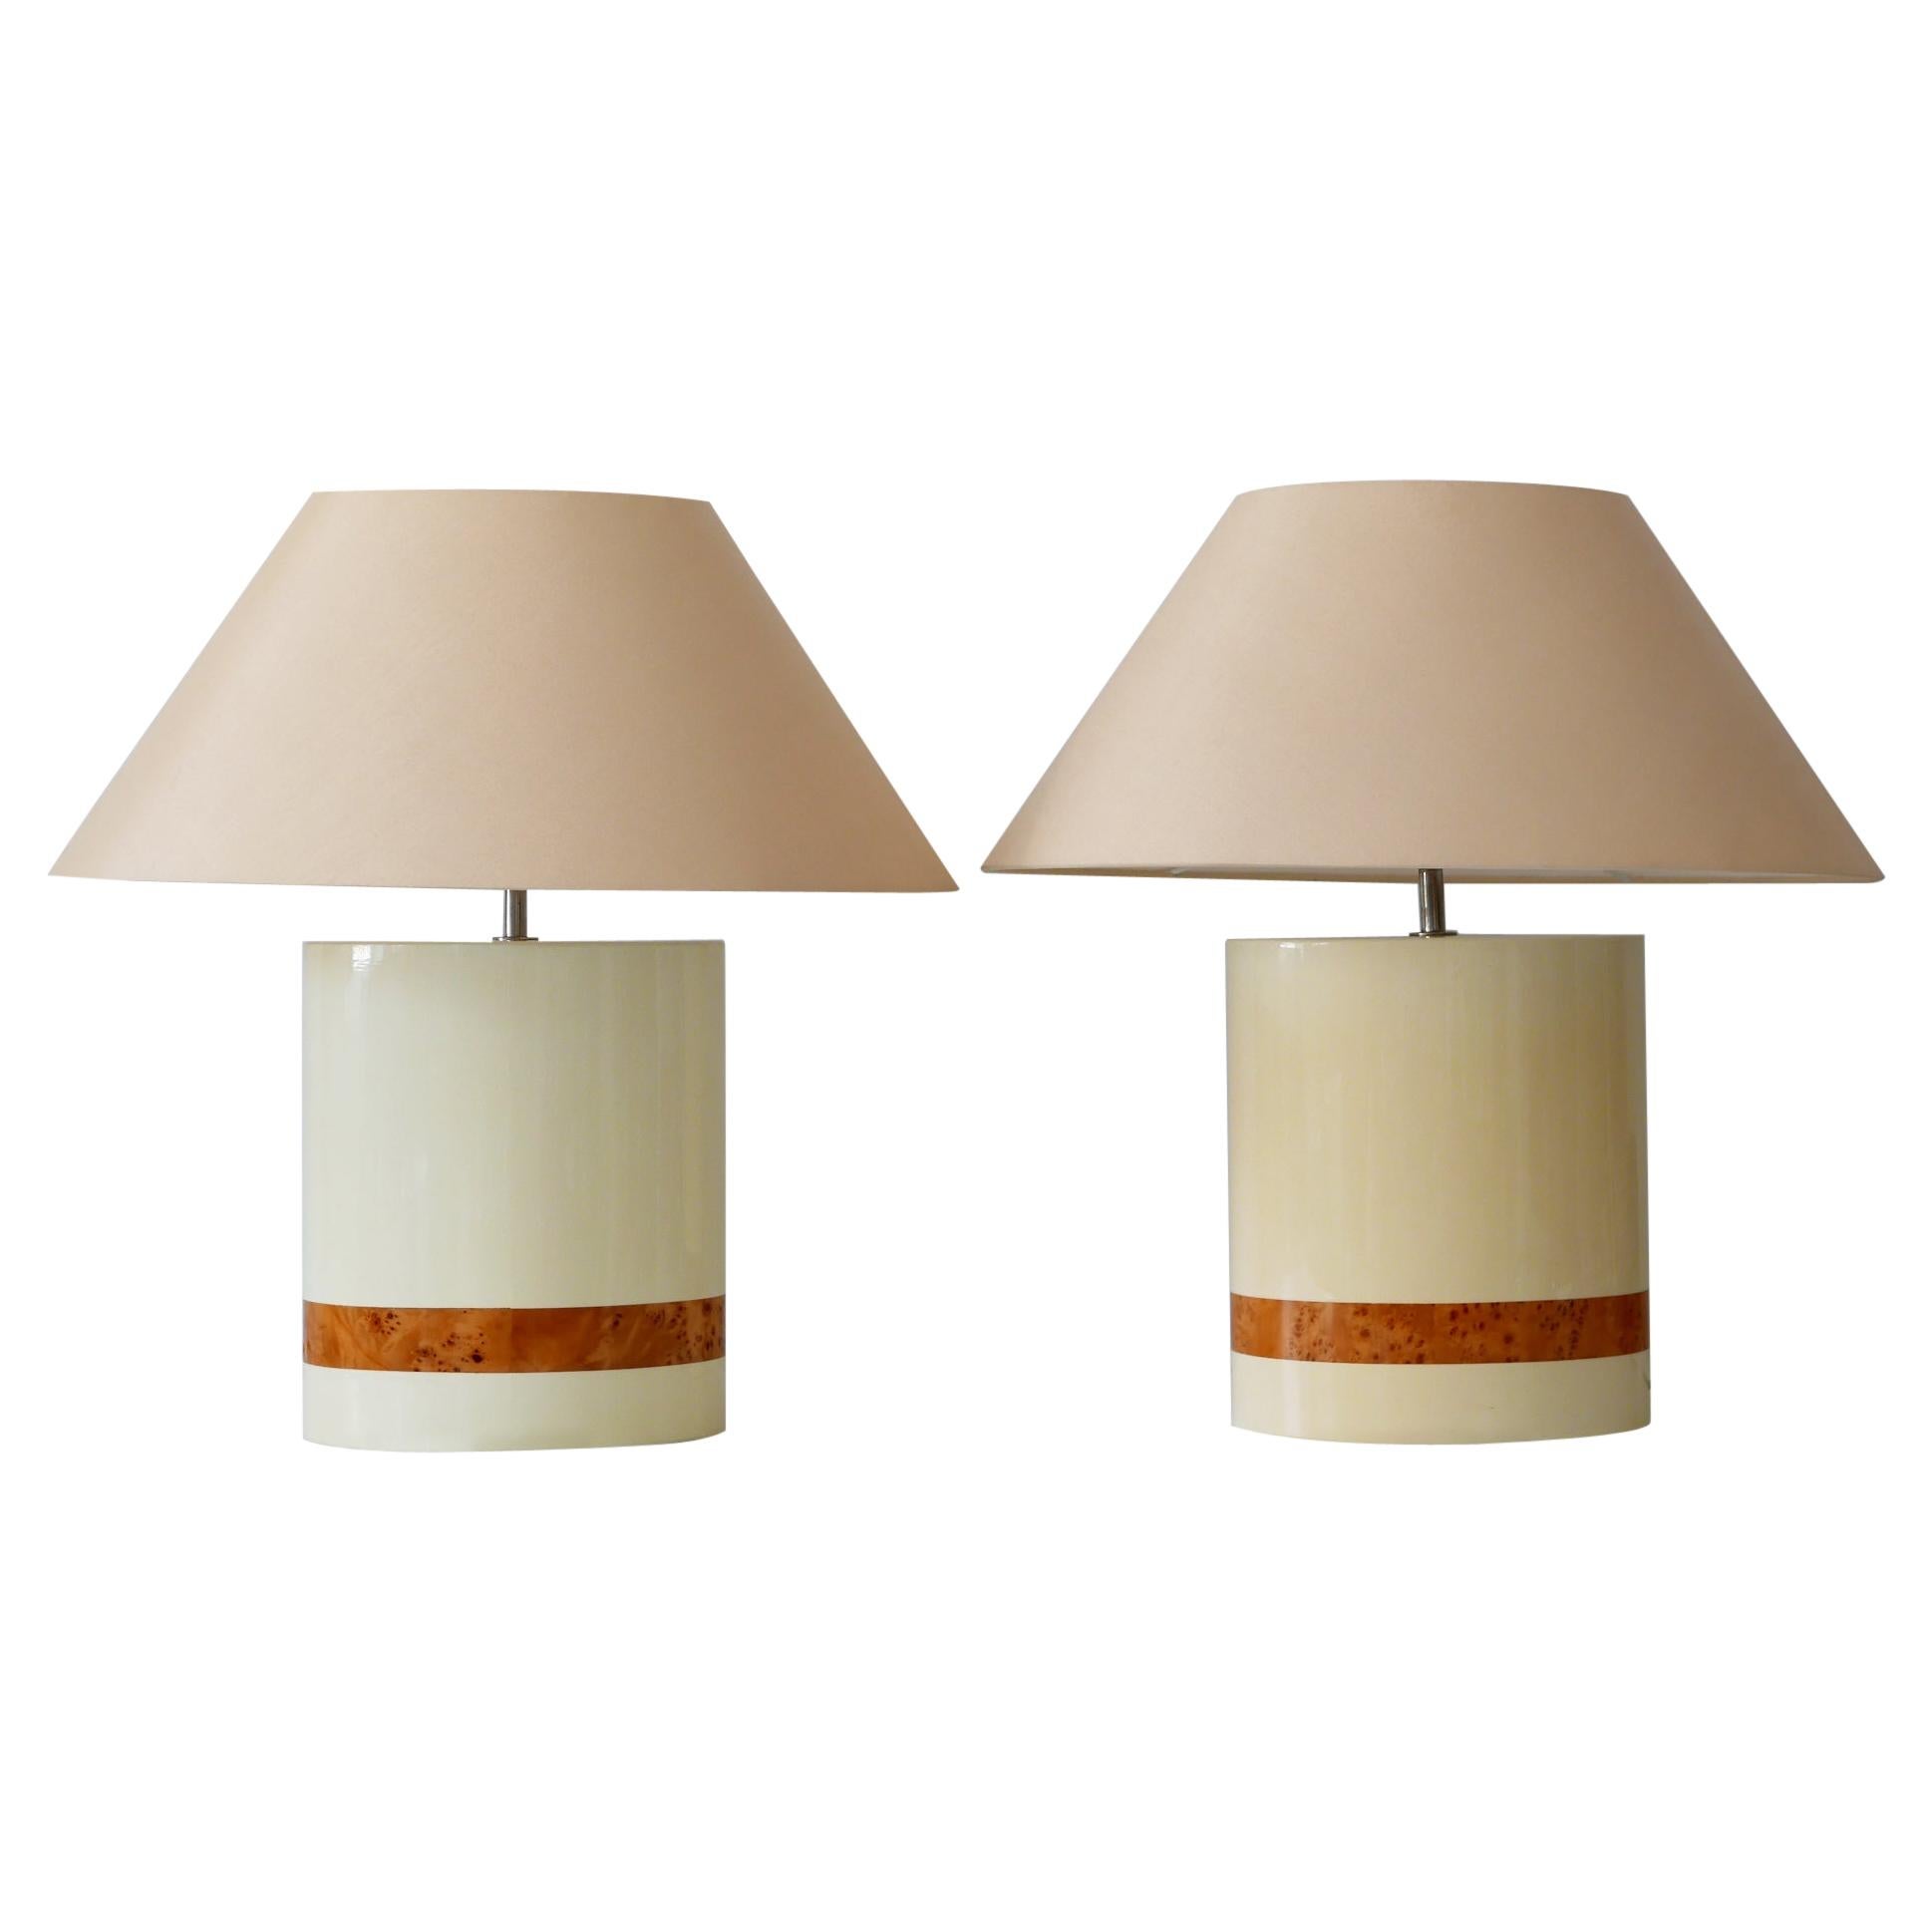 Set of Two Elegant Mid-Century Modern Table Lamps by Tommaso Barbi, Italy, 1970s